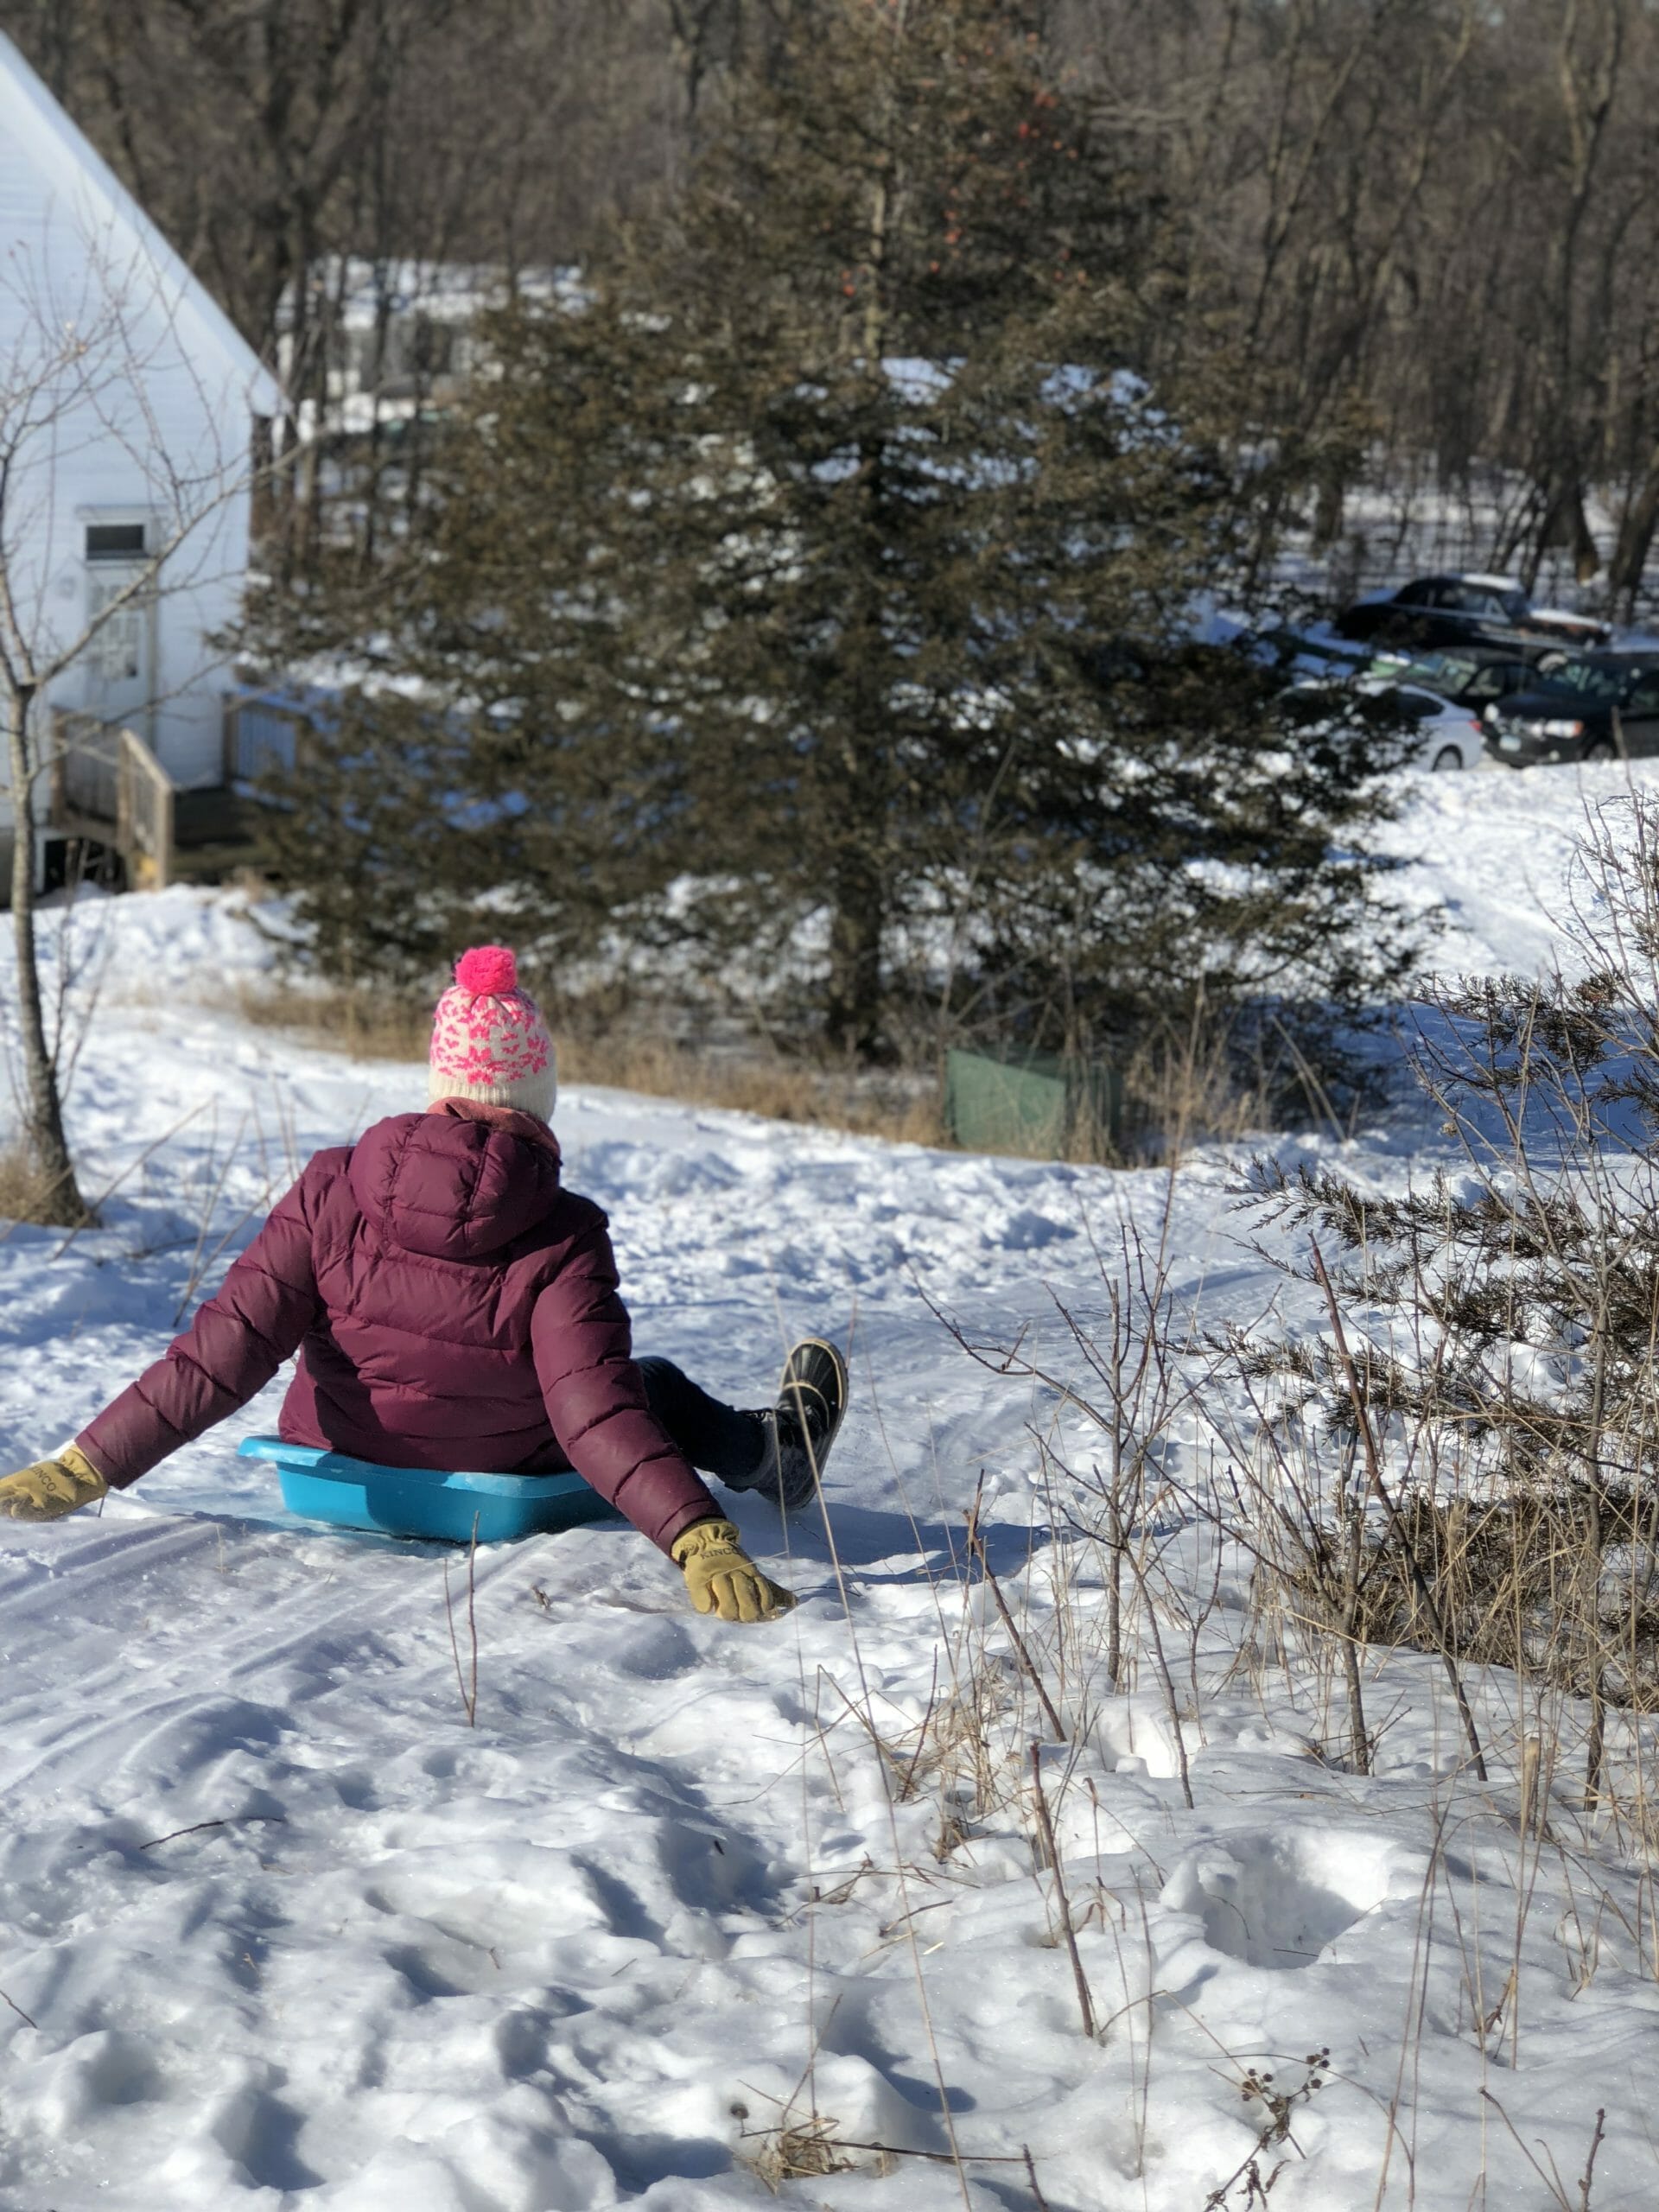 A person slides down a snowy hill on a sled